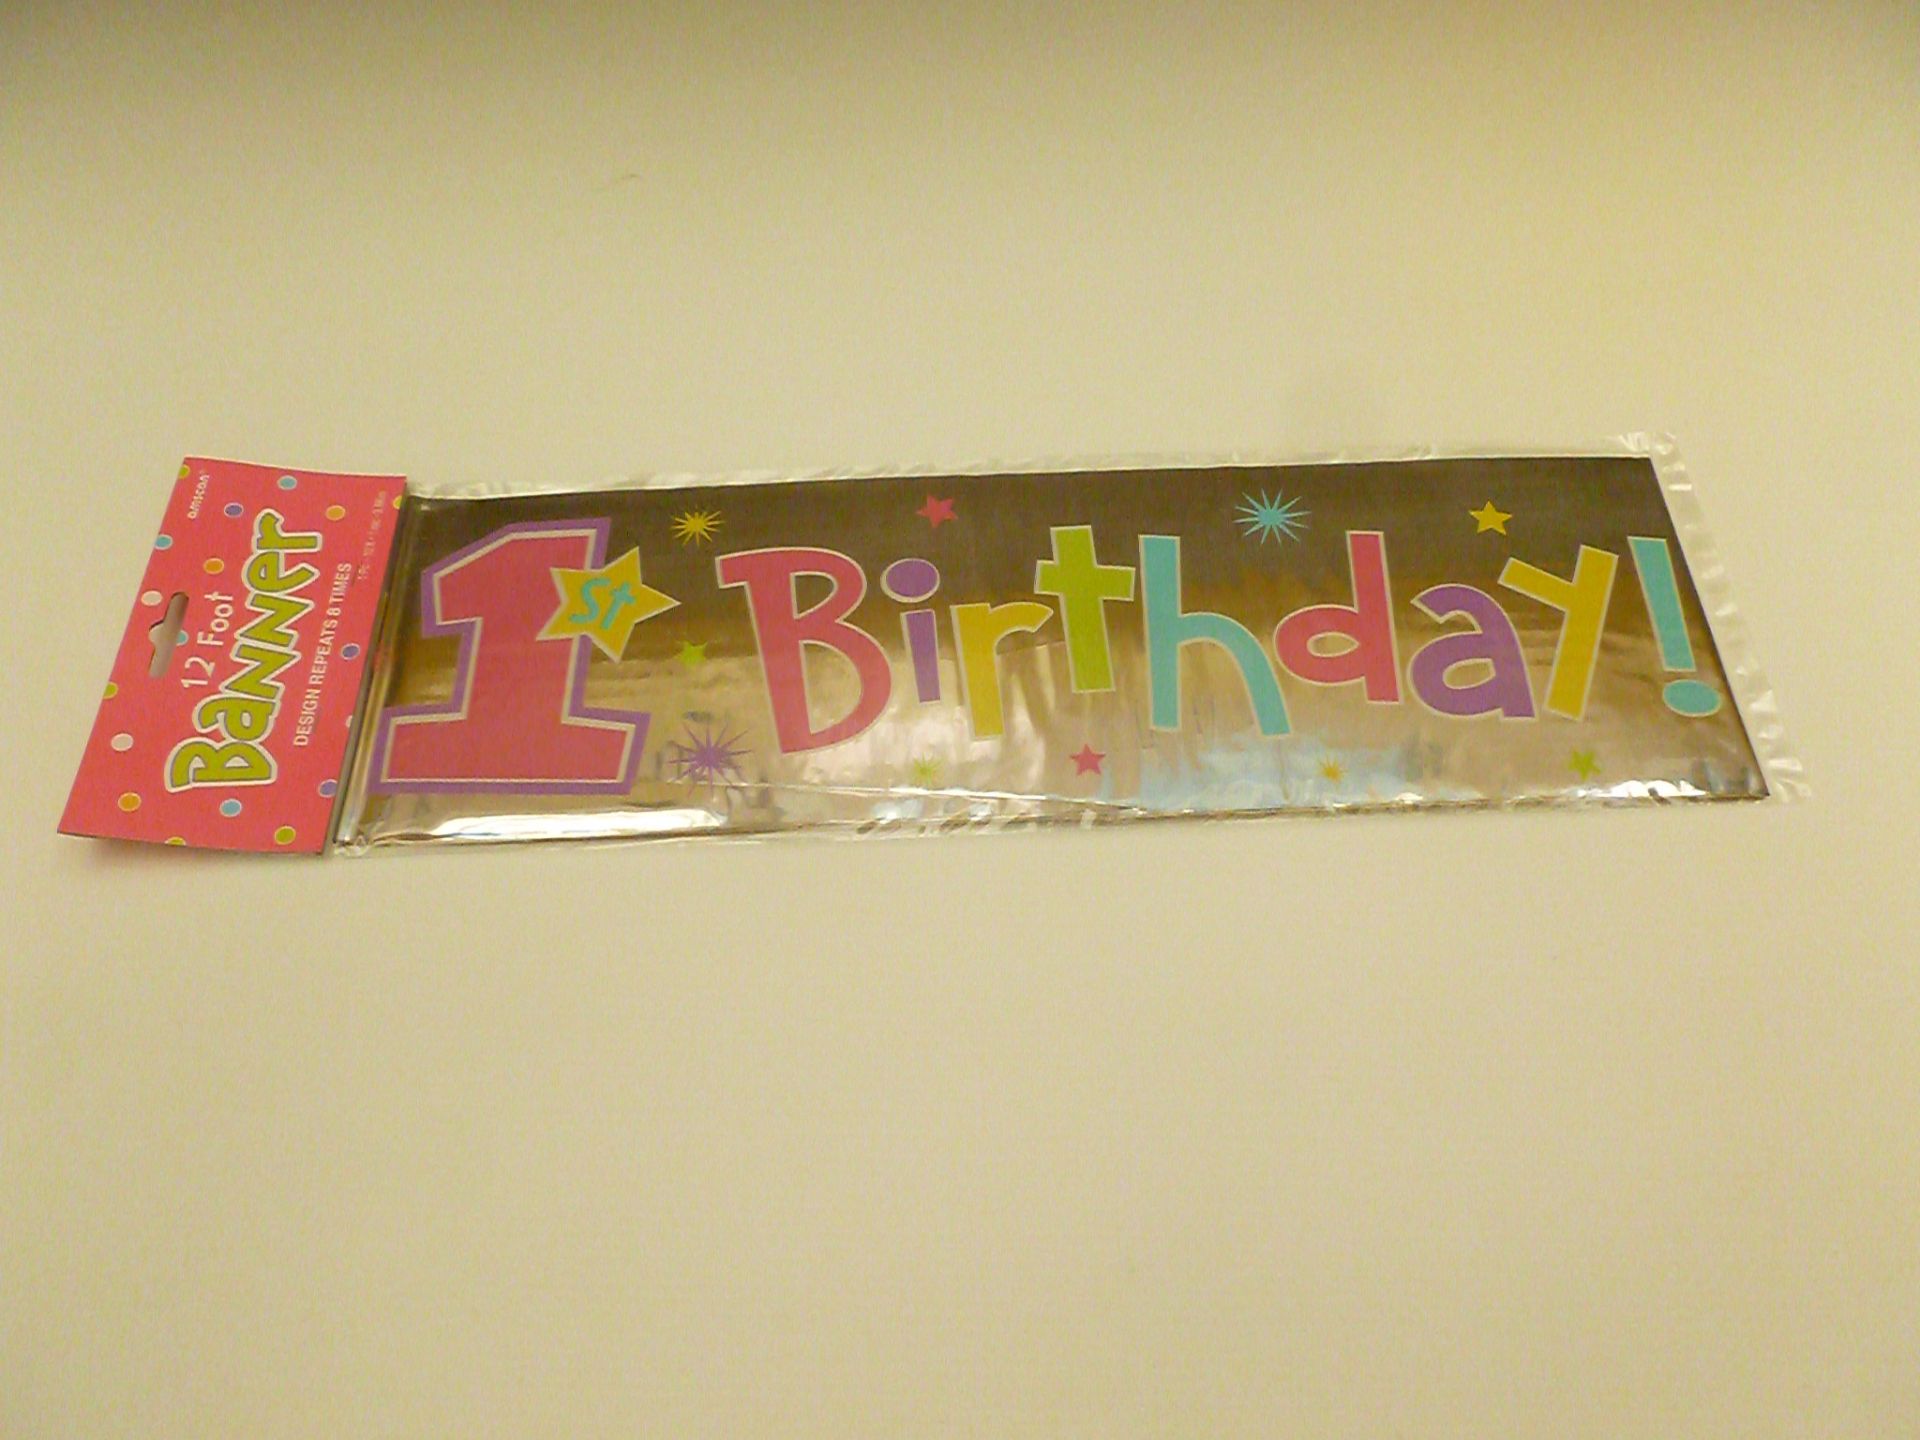 24 packs of 6 Girls 1st Birthday Banner, 12ft (Design repeats 8 times) New, in original packaging